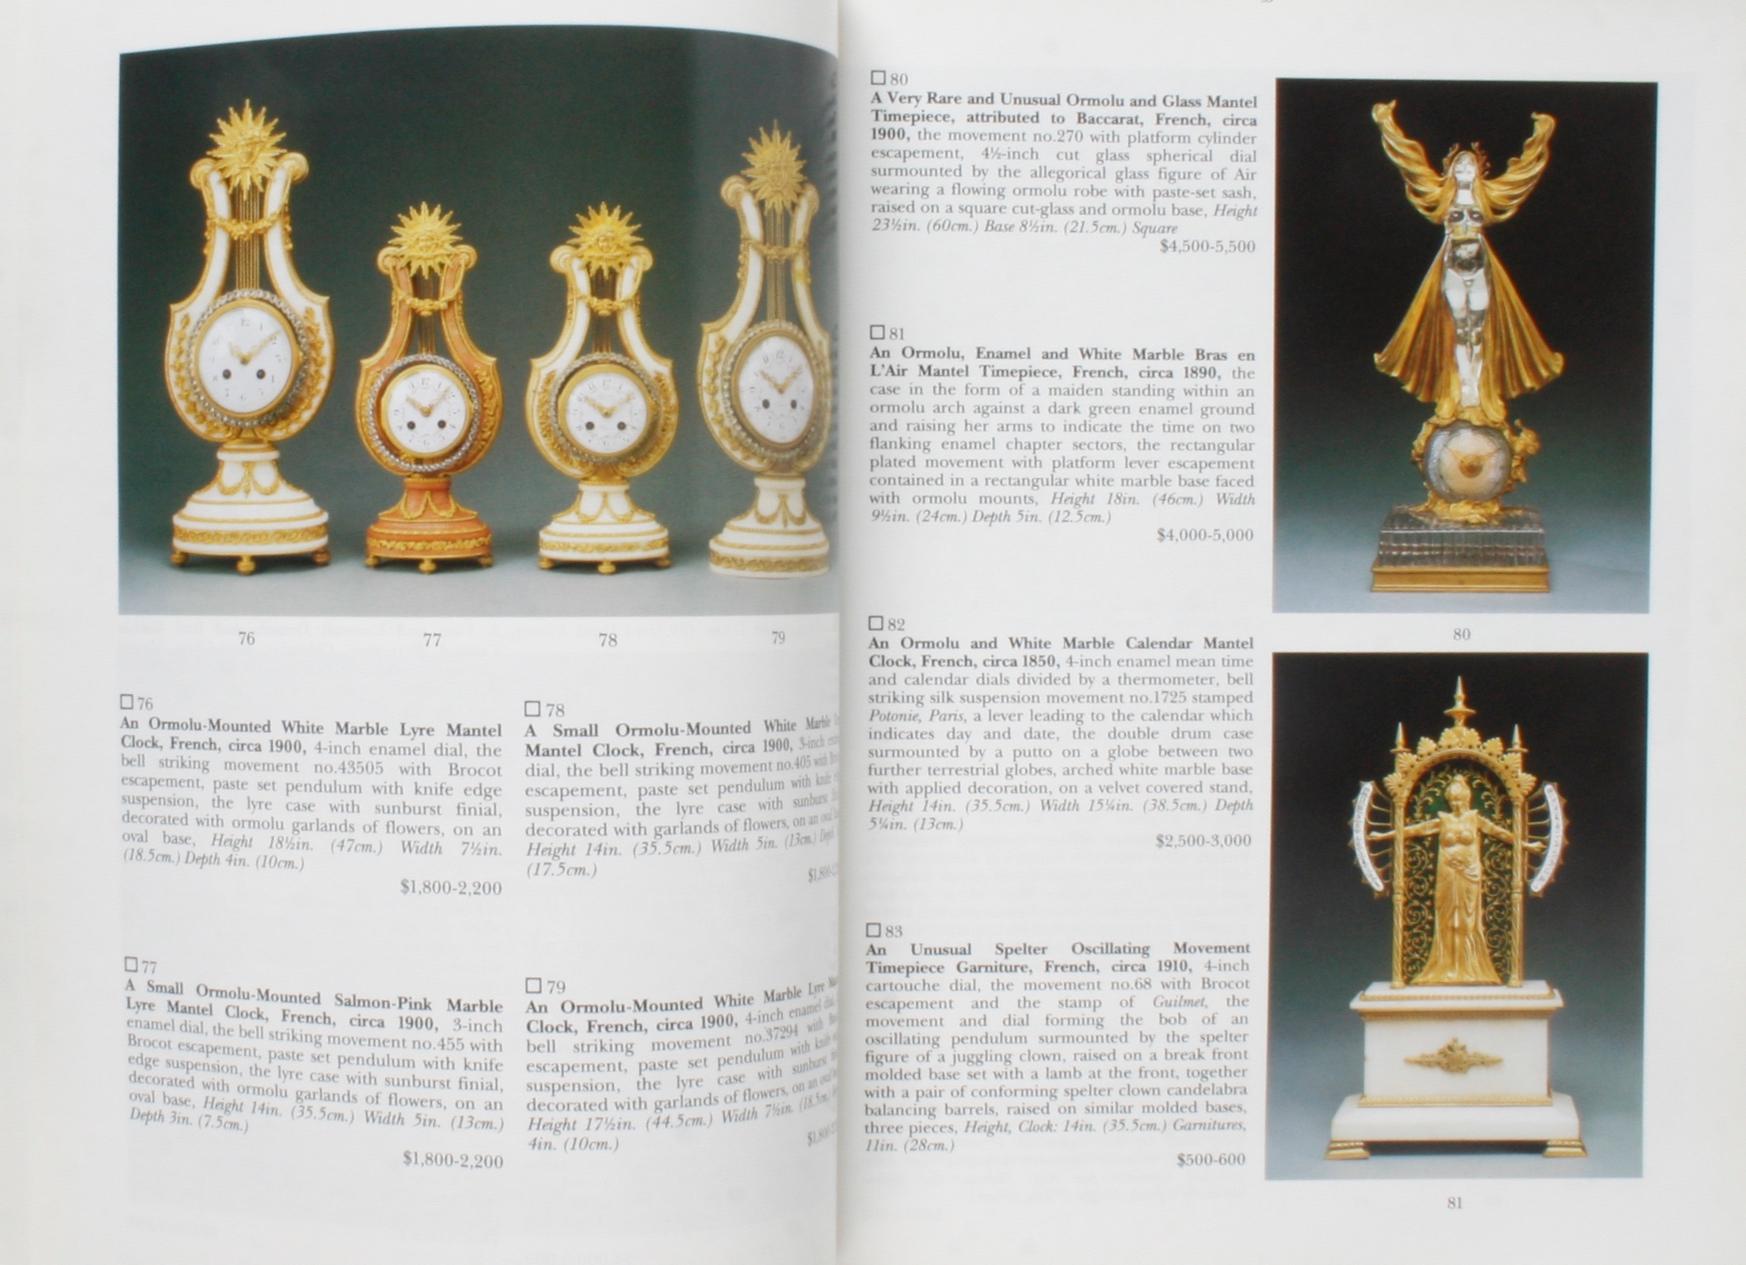 Sotheby's: The Joseph M. Meraux Collection of Rare and Unusual Clocks, 6/1993. Softcover auction catalogue 500 lots with results. 